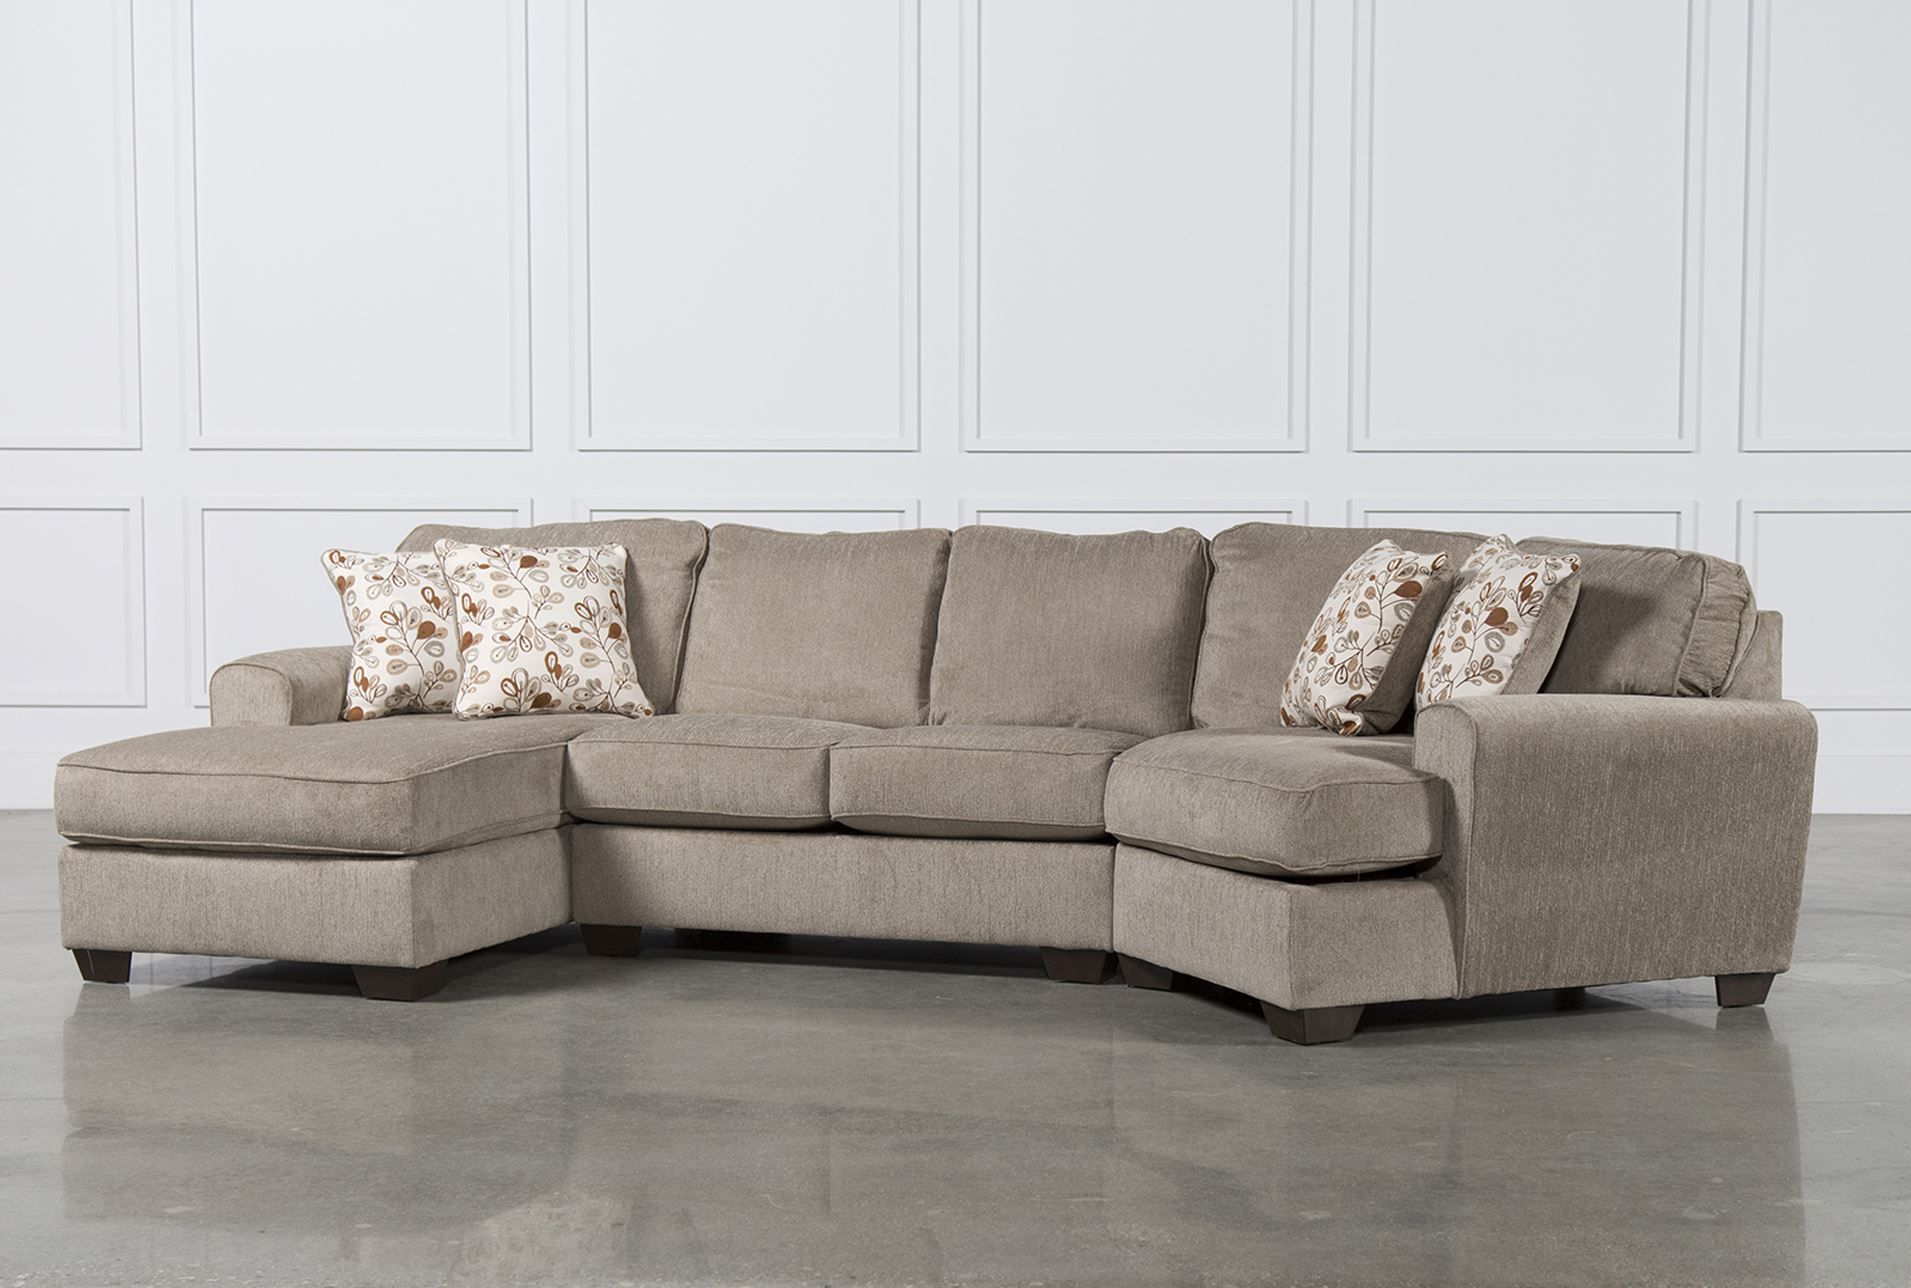 Cuddler Sectional Sofa Carena 2 Pc Fabric Sectional Sofa With Regard To 2Pc Maddox Right Arm Facing Sectional Sofas With Chaise Brown (View 3 of 15)